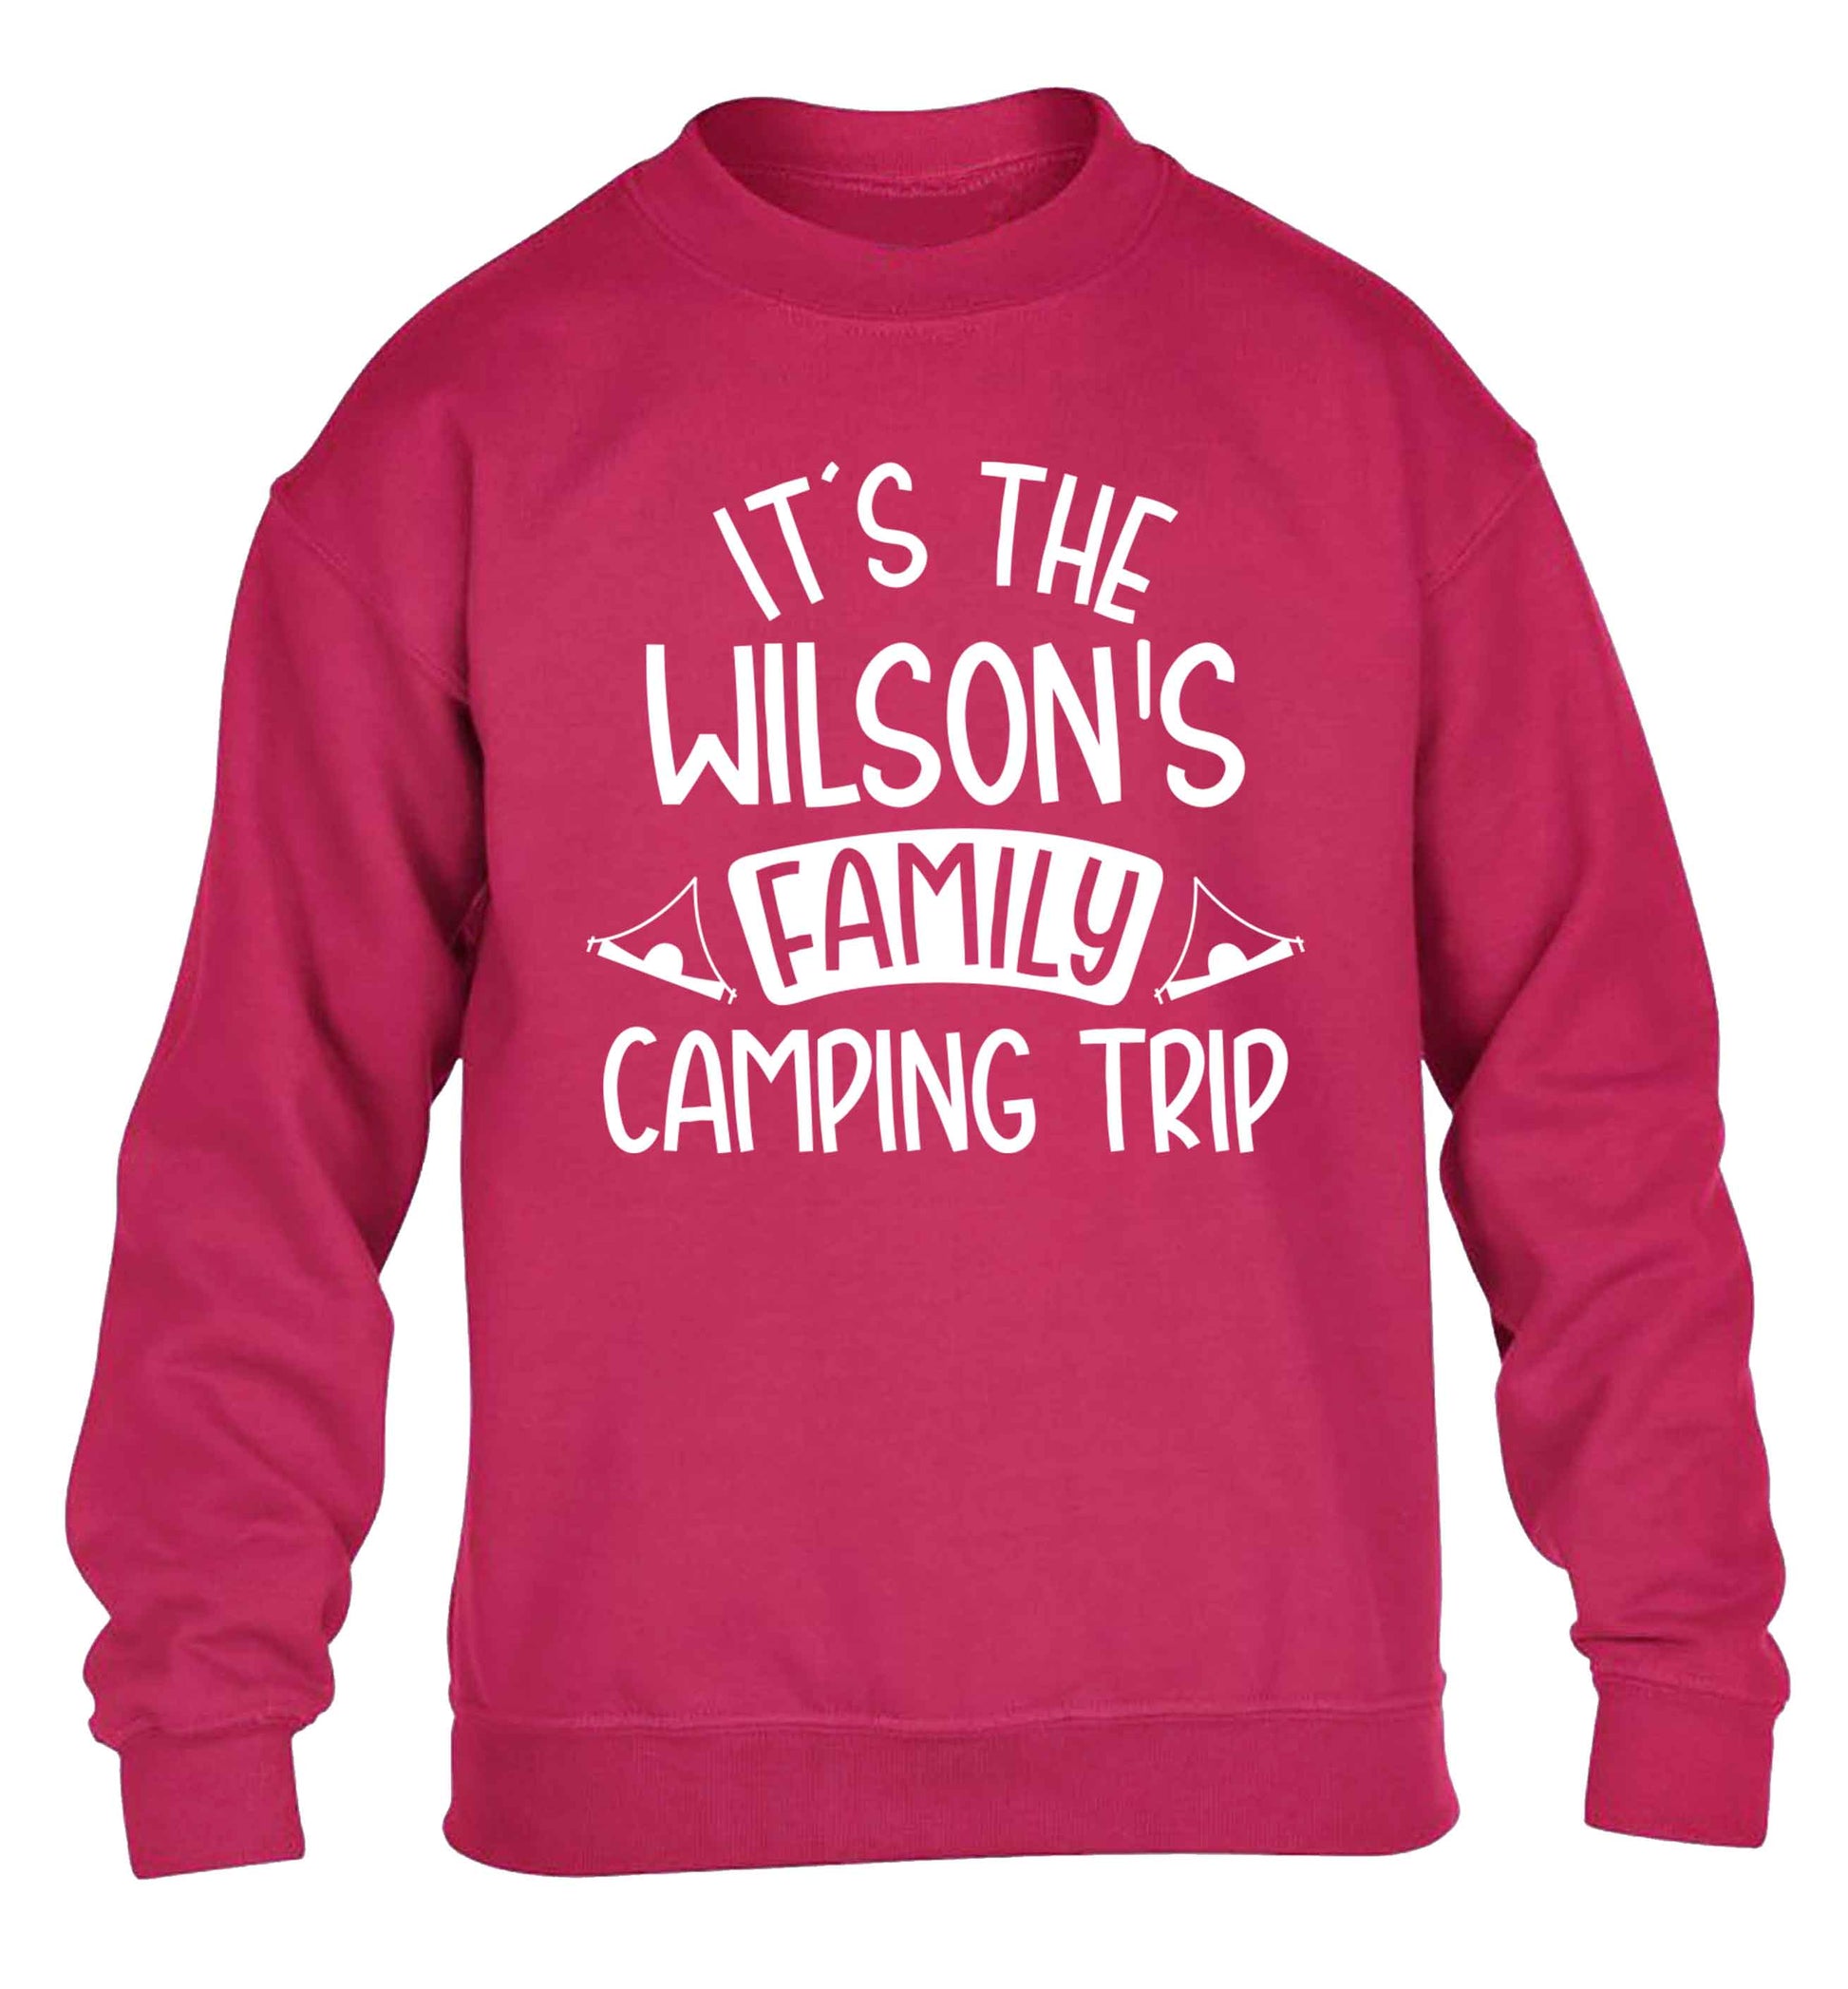 It's the Wilson's family camping trip personalised children's pink sweater 12-13 Years